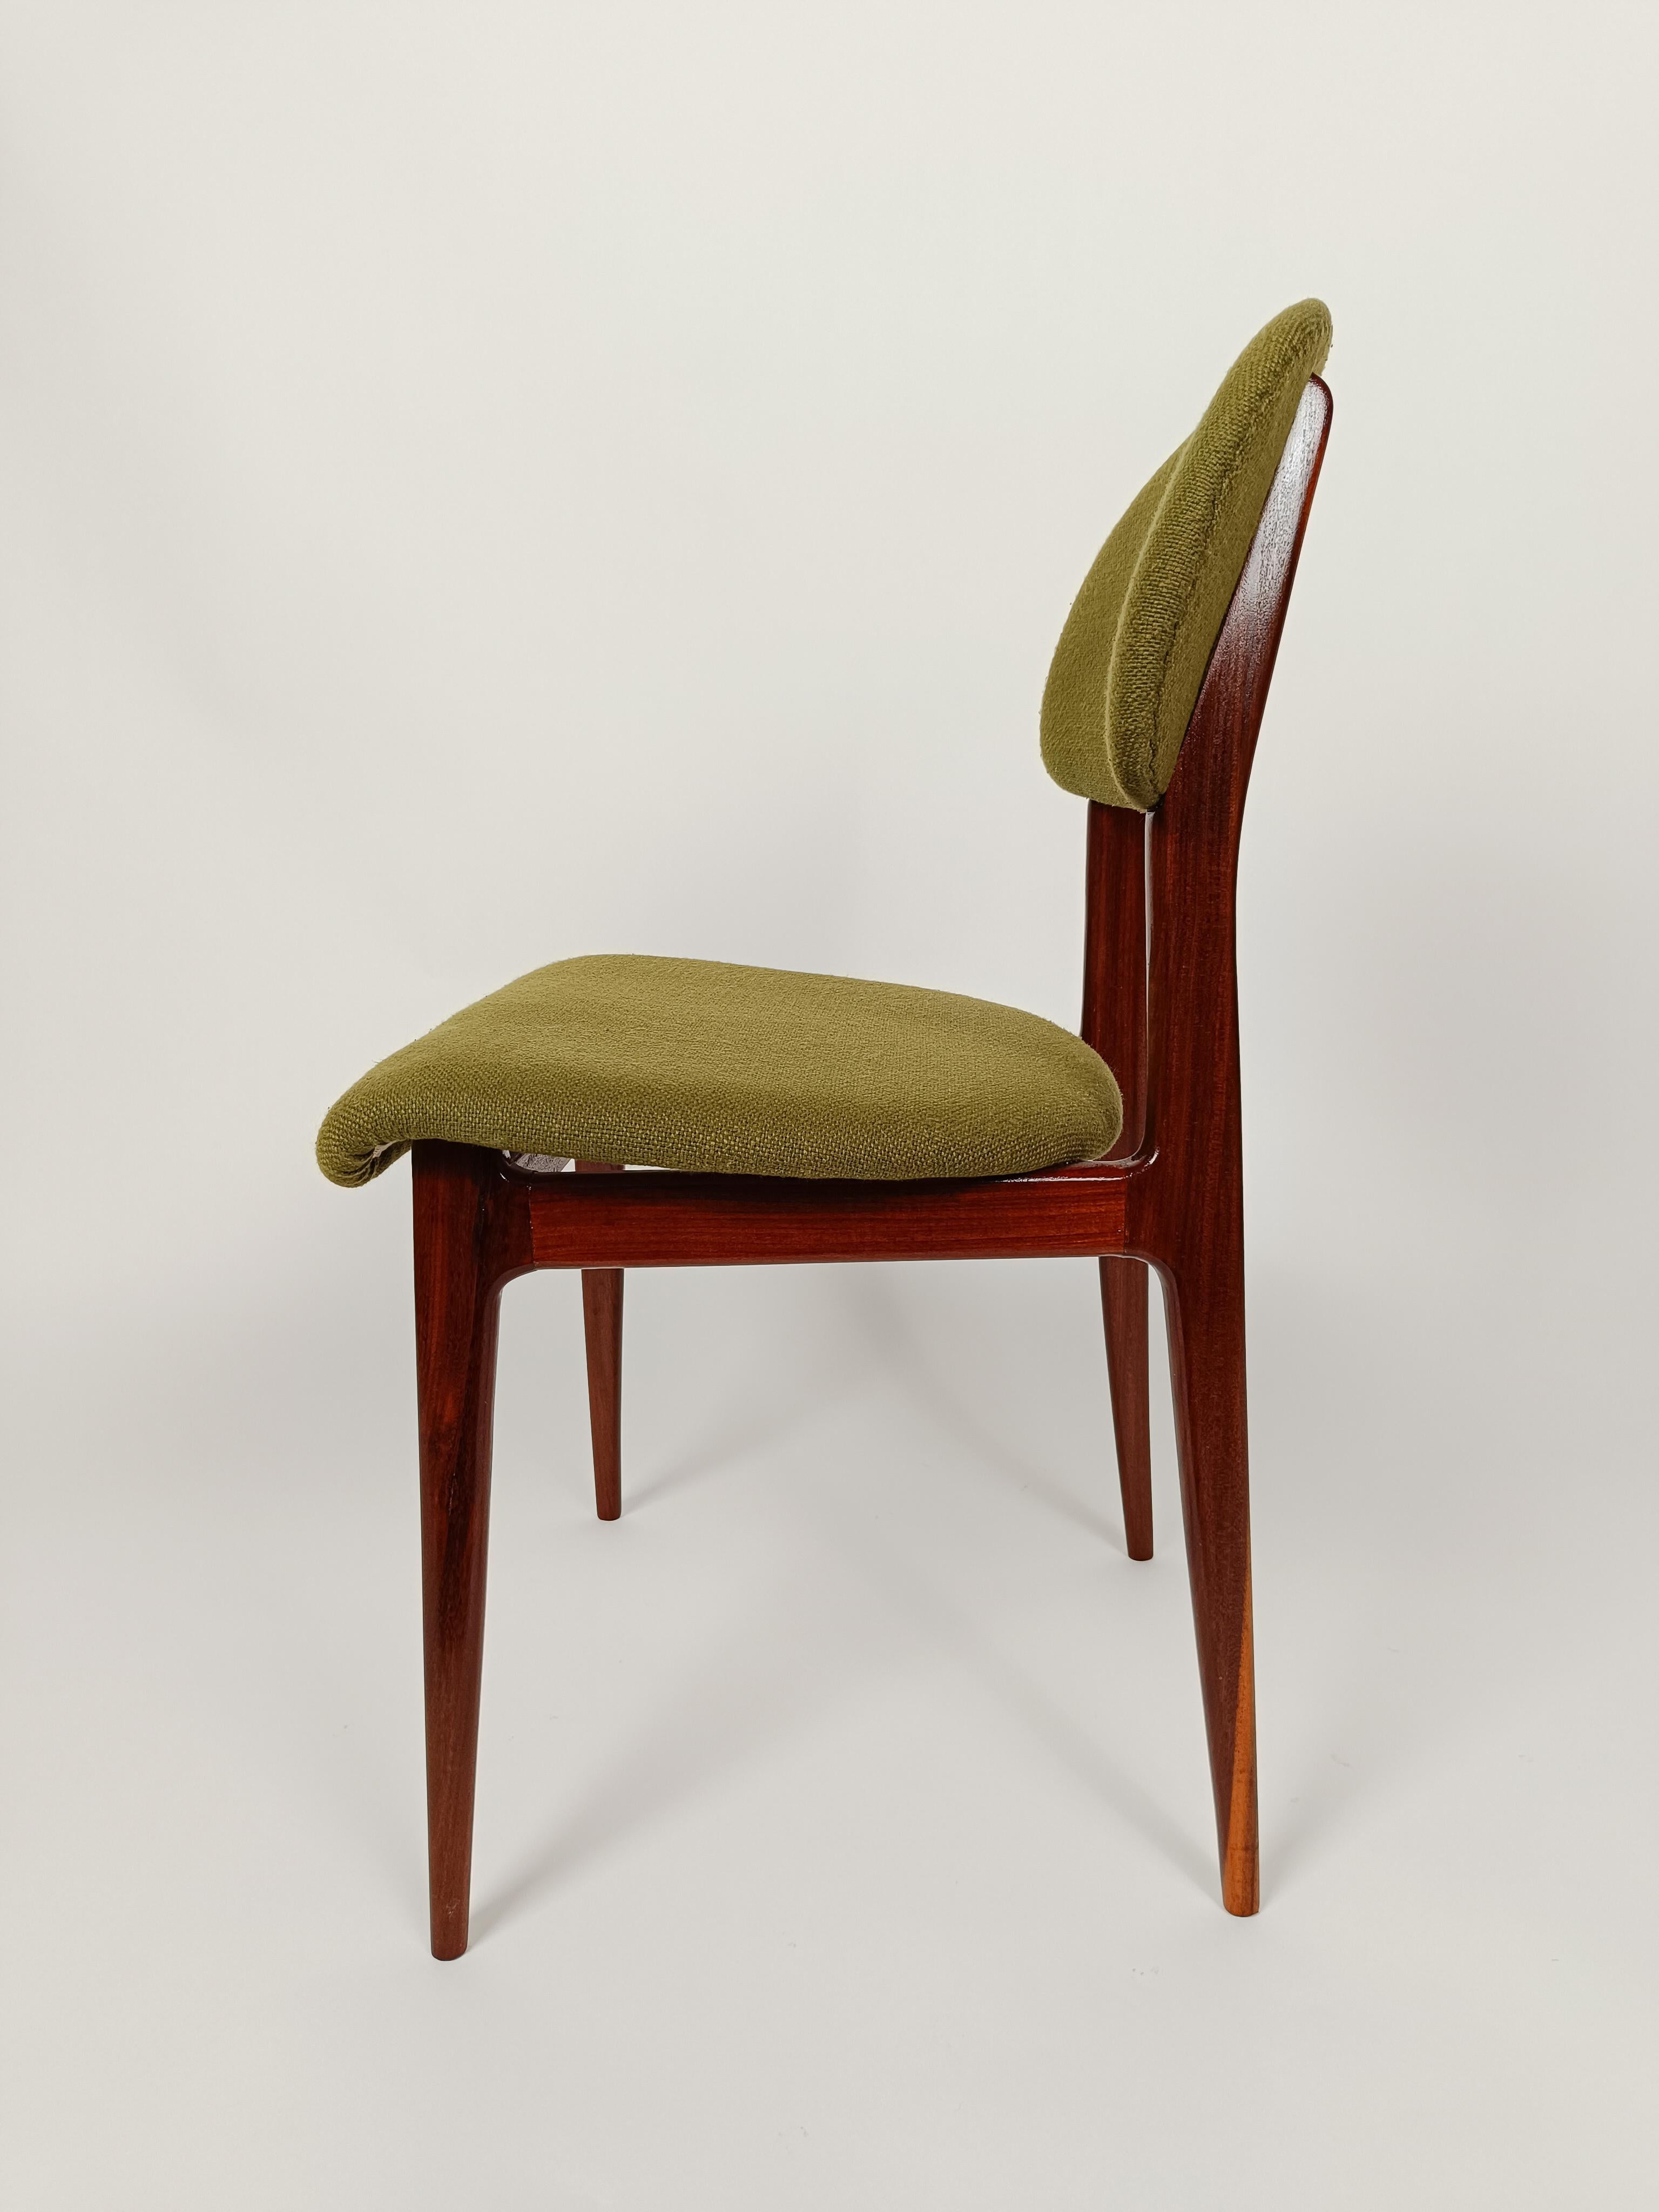 Italian Midcentury Chairs Attributed to Carlo Hauner and Martin Eisler, 1960s For Sale 2